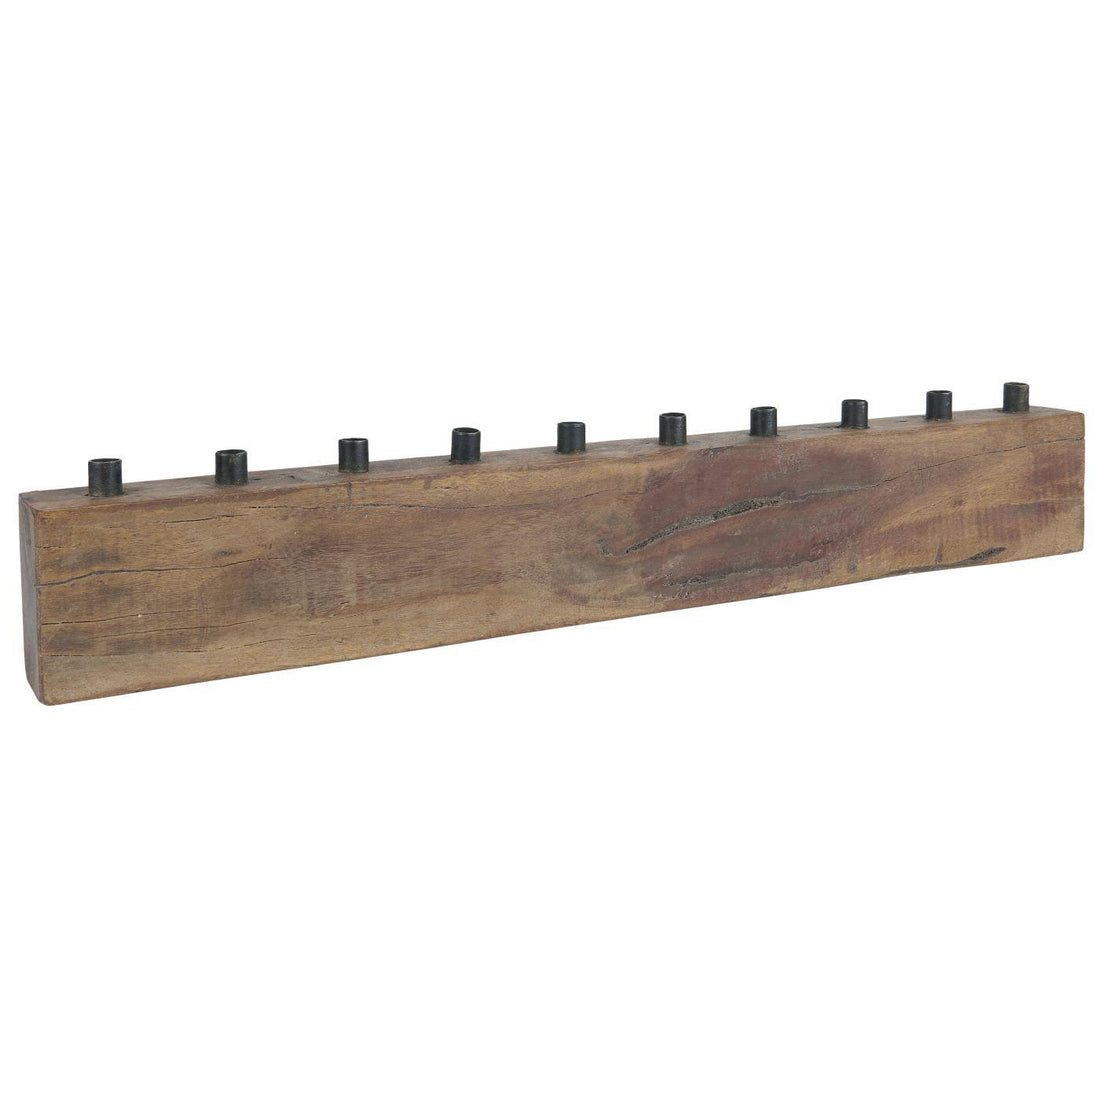 RECLAIMED INDIAN WOOD CANDLE HOLDER | HOLDS 10 TAPERS